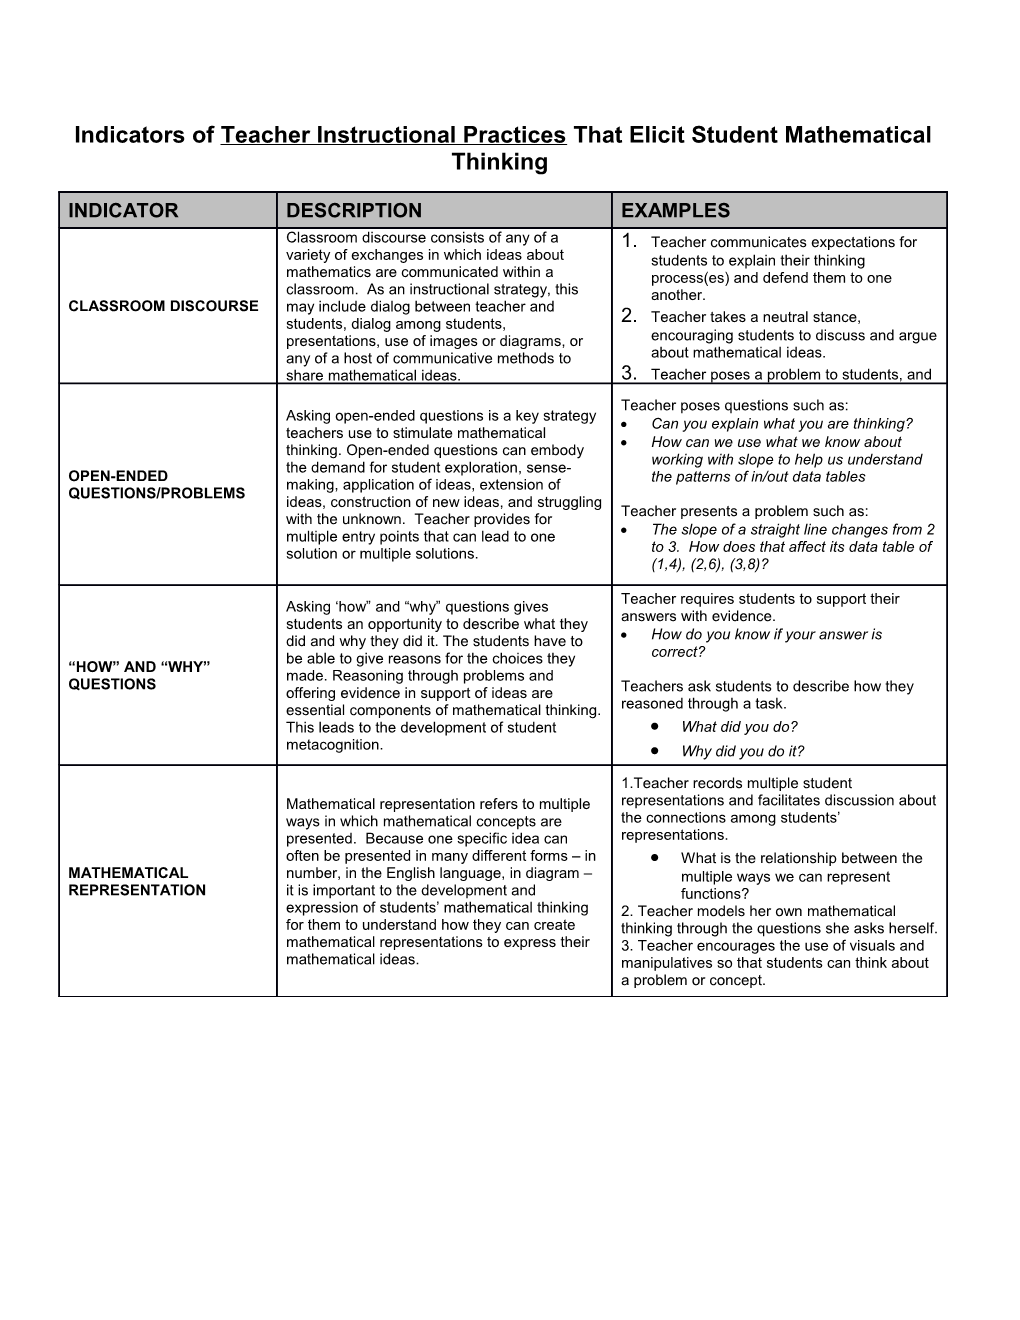 Indicators of Teacher Instructional Practices That Elicit Student Mathematical Thinking